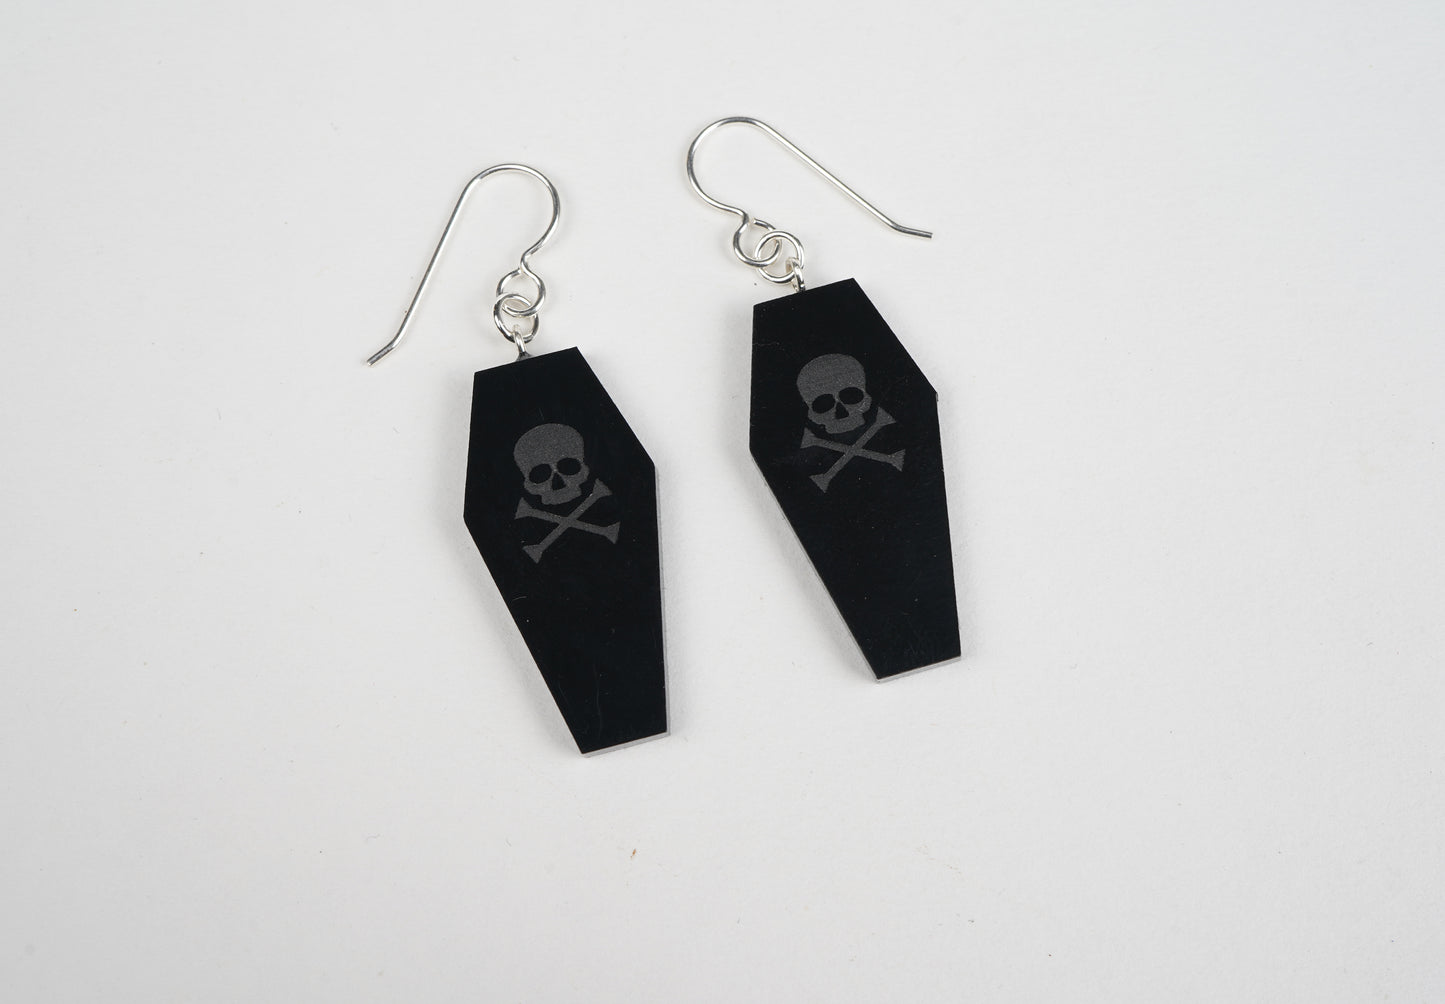 Black coffin earrings with skull and crossbone